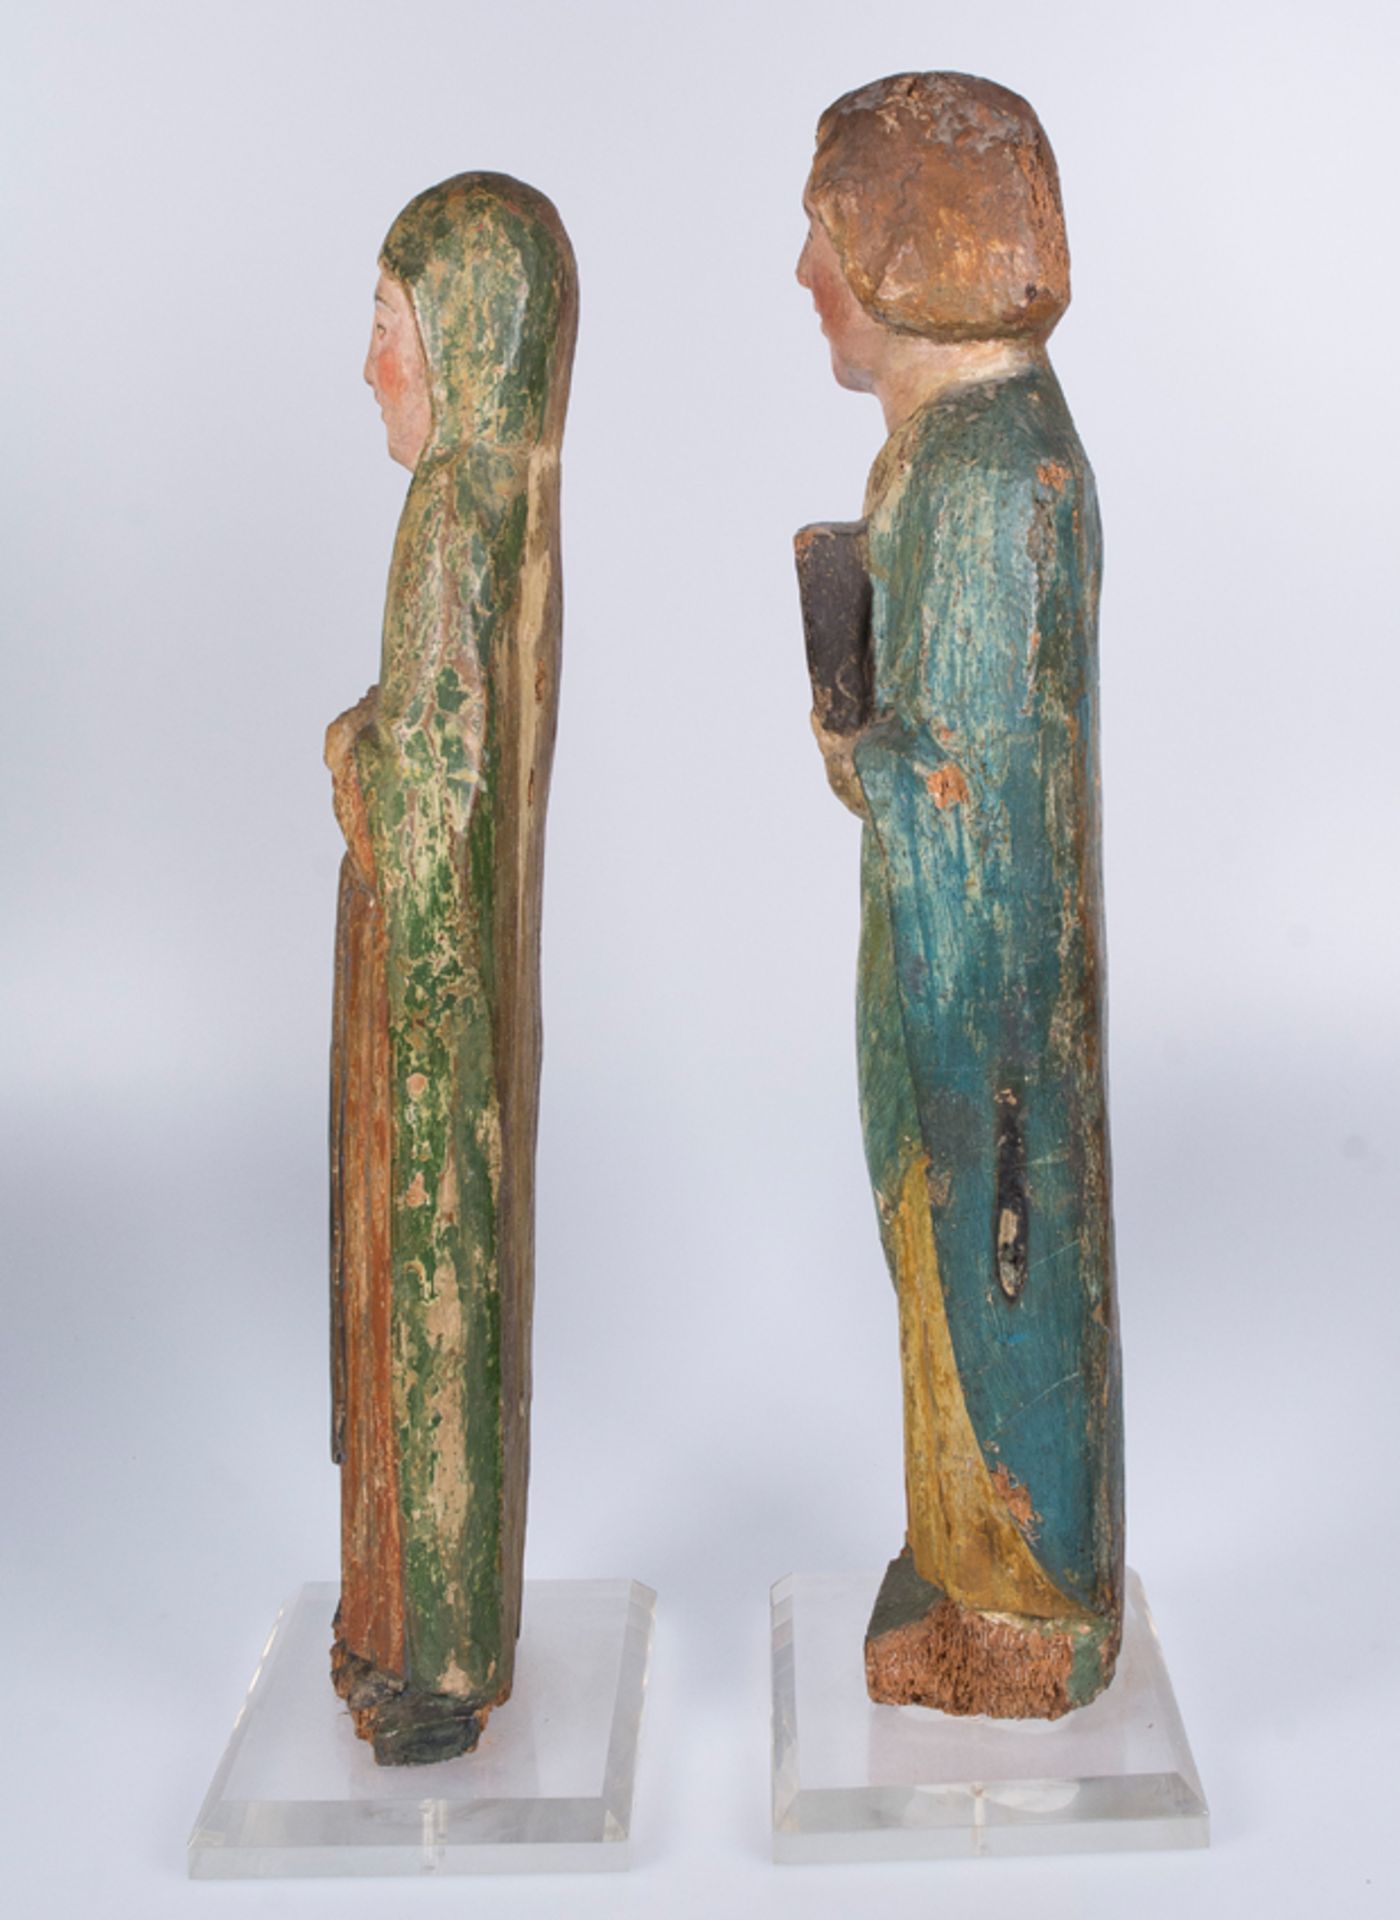 "The Virgin Mary" and "Saint John". Pair of wooden sculptures. ¿Castilian workshop? Late 13th cent. - Image 6 of 7